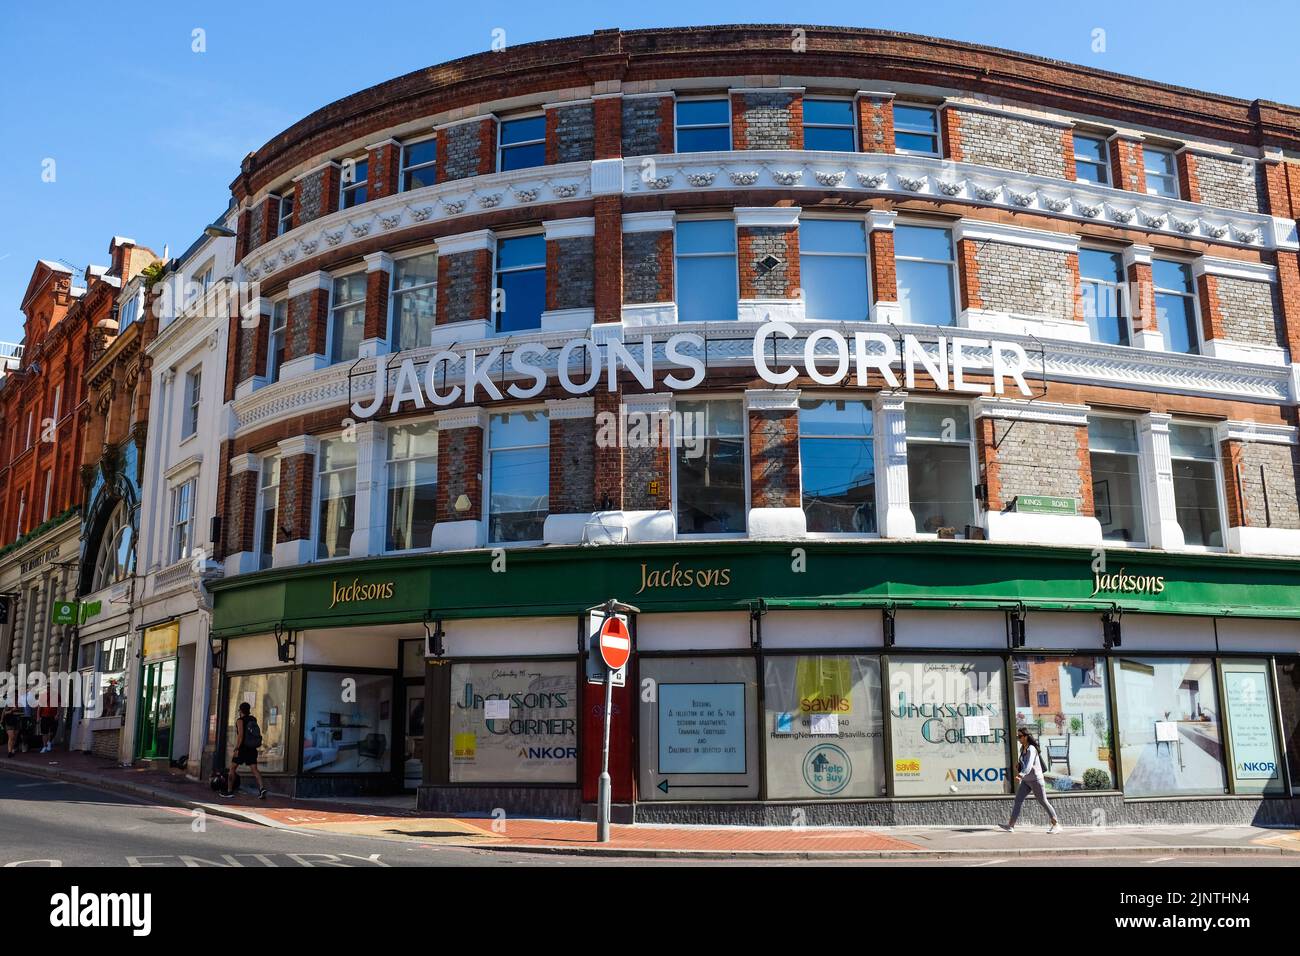 Jacksons Corner in Reading, England, is on the corner of Market Place and Kings Road. Home to Jacksons department store until its closure in 2013. Stock Photo